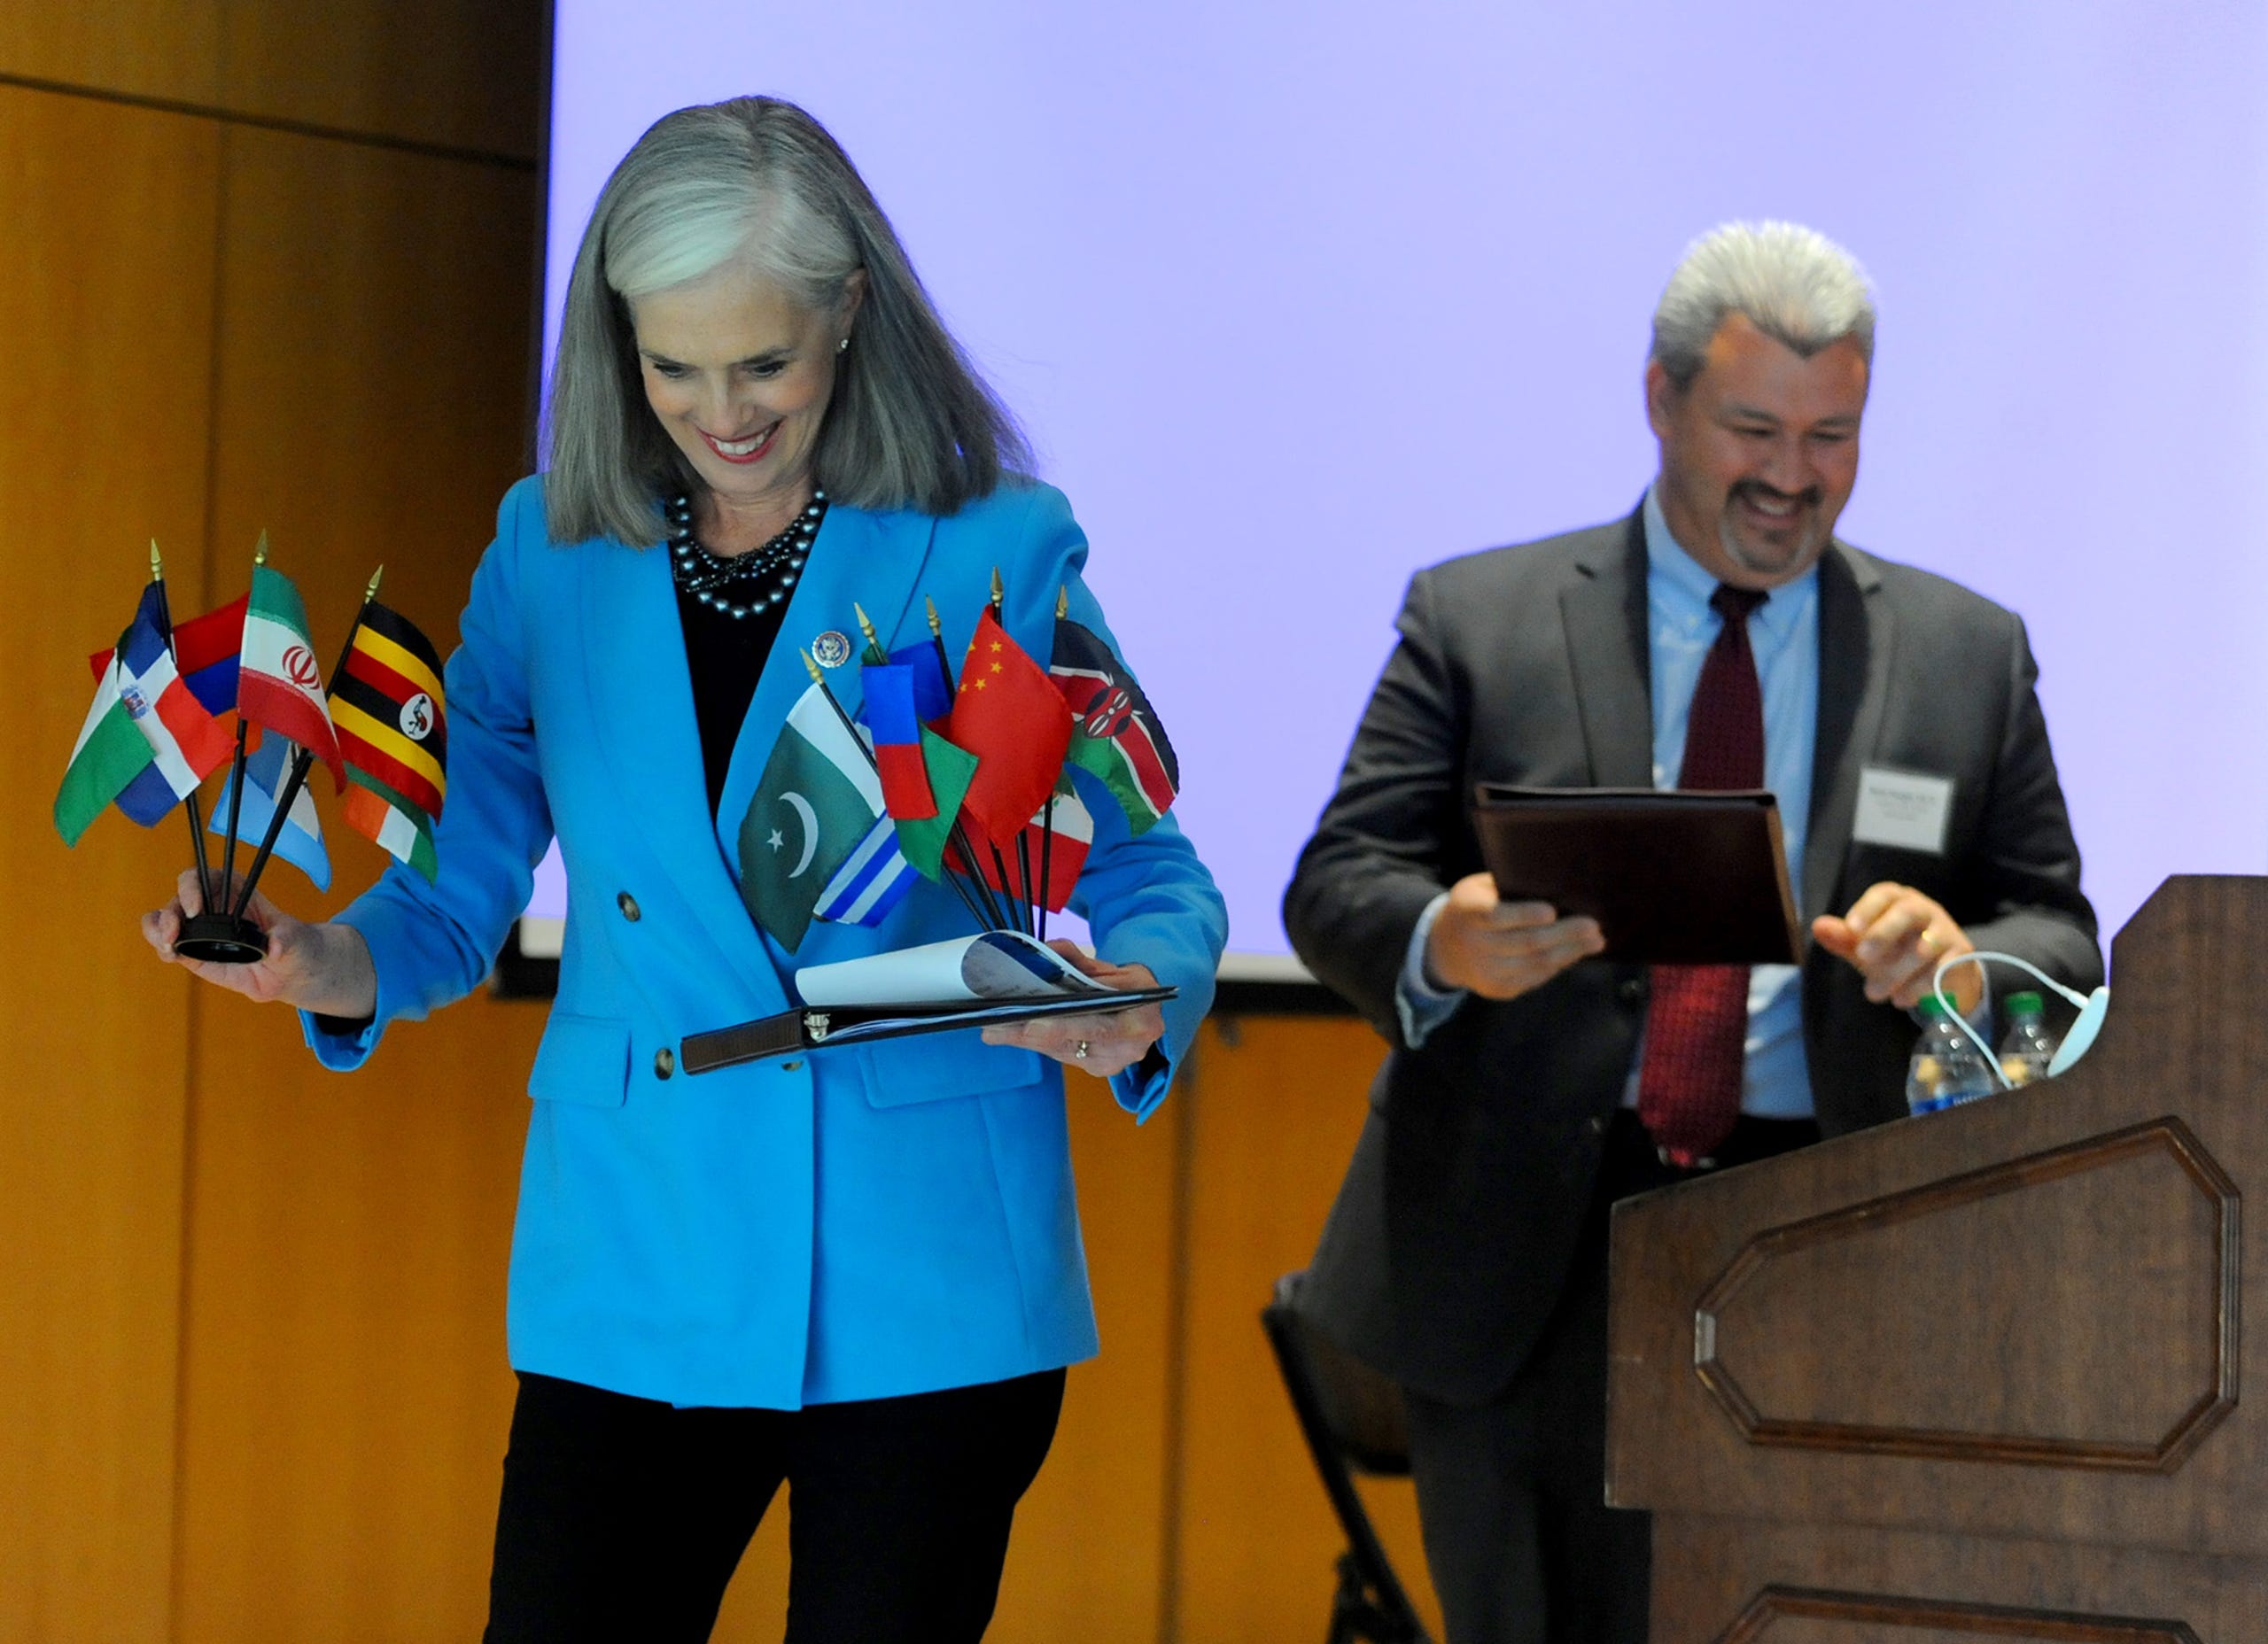 Rep. Katherine Clark, Assistant House Speaker, leaves the stage with flags given to her by students after she announced a $600,000 expansion of the MetroWest Scholars Early Start program, early college funding for Waltham students,  at Framingham State University, May 3, 2022.  At right is Waltham Supt. of Schools Brian Reagan.